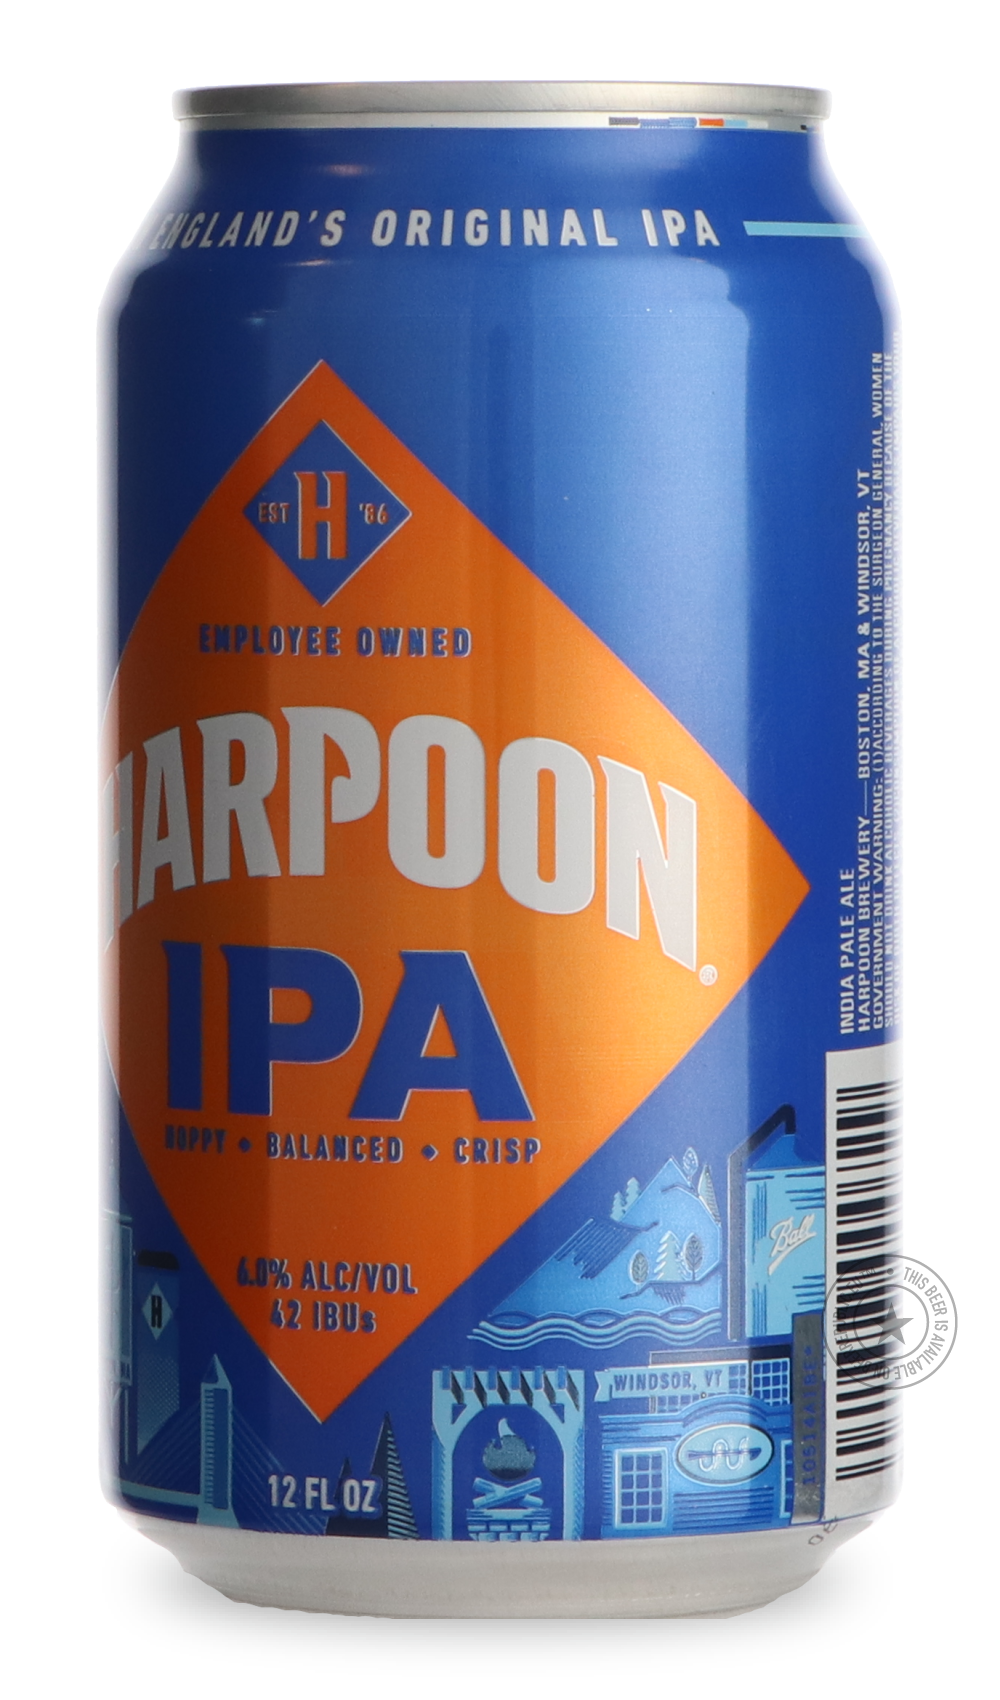 -Harpoon- Harpoon IPA-IPA- Only @ Beer Republic - The best online beer store for American & Canadian craft beer - Buy beer online from the USA and Canada - Bier online kopen - Amerikaans bier kopen - Craft beer store - Craft beer kopen - Amerikanisch bier kaufen - Bier online kaufen - Acheter biere online - IPA - Stout - Porter - New England IPA - Hazy IPA - Imperial Stout - Barrel Aged - Barrel Aged Imperial Stout - Brown - Dark beer - Blond - Blonde - Pilsner - Lager - Wheat - Weizen - Amber - Barley Wine